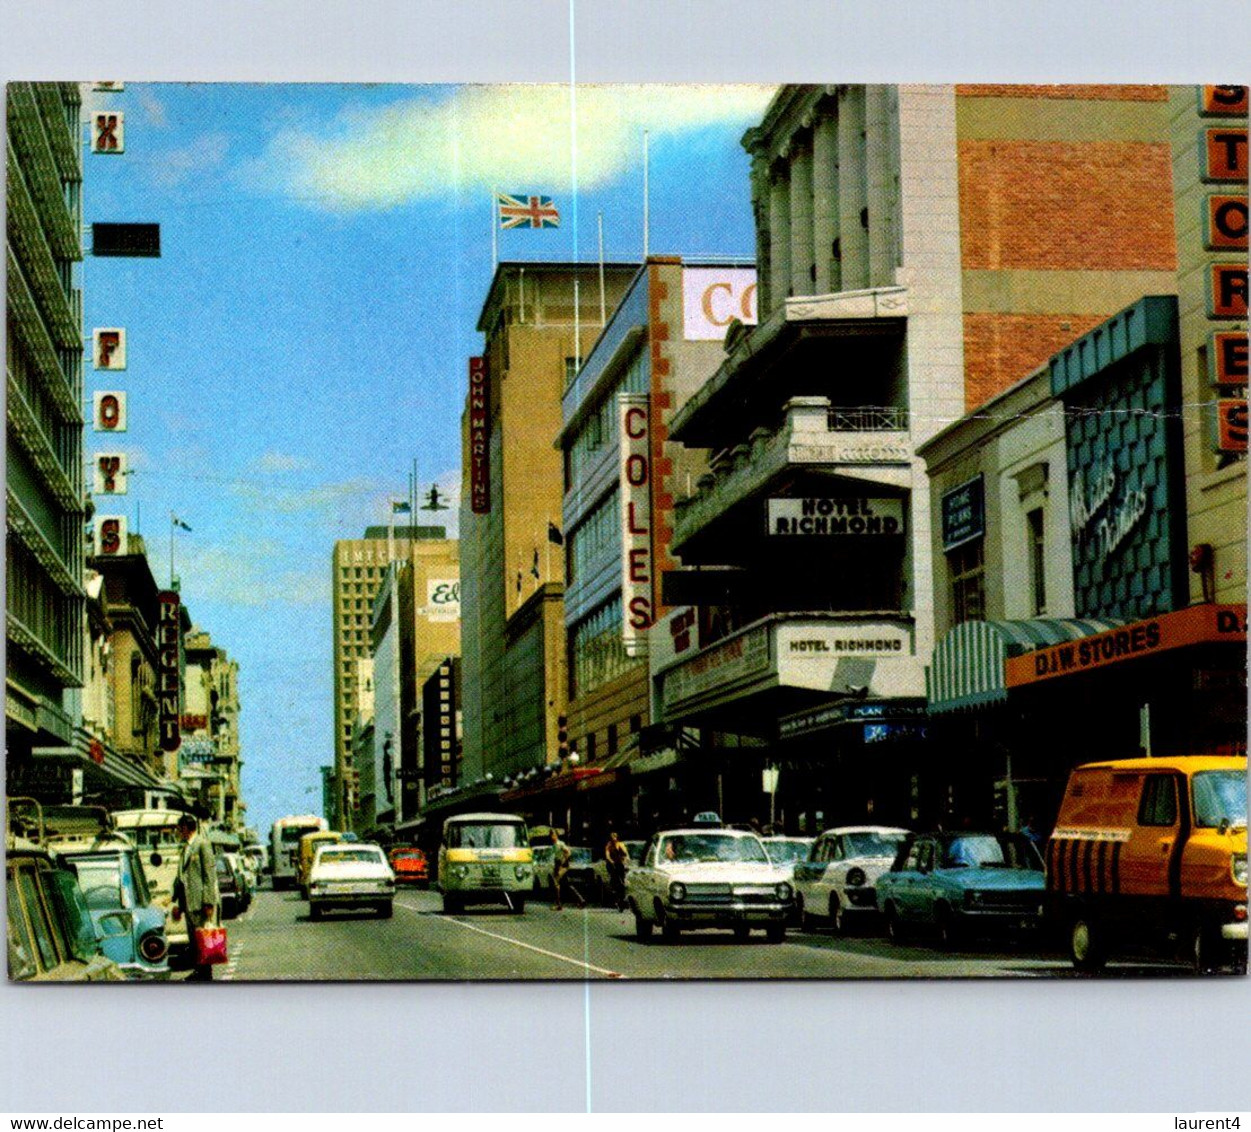 (1 F 33) Australia - SA - Runddle Street In Adelaide (beofre It Became Pedestrian) - Adelaide